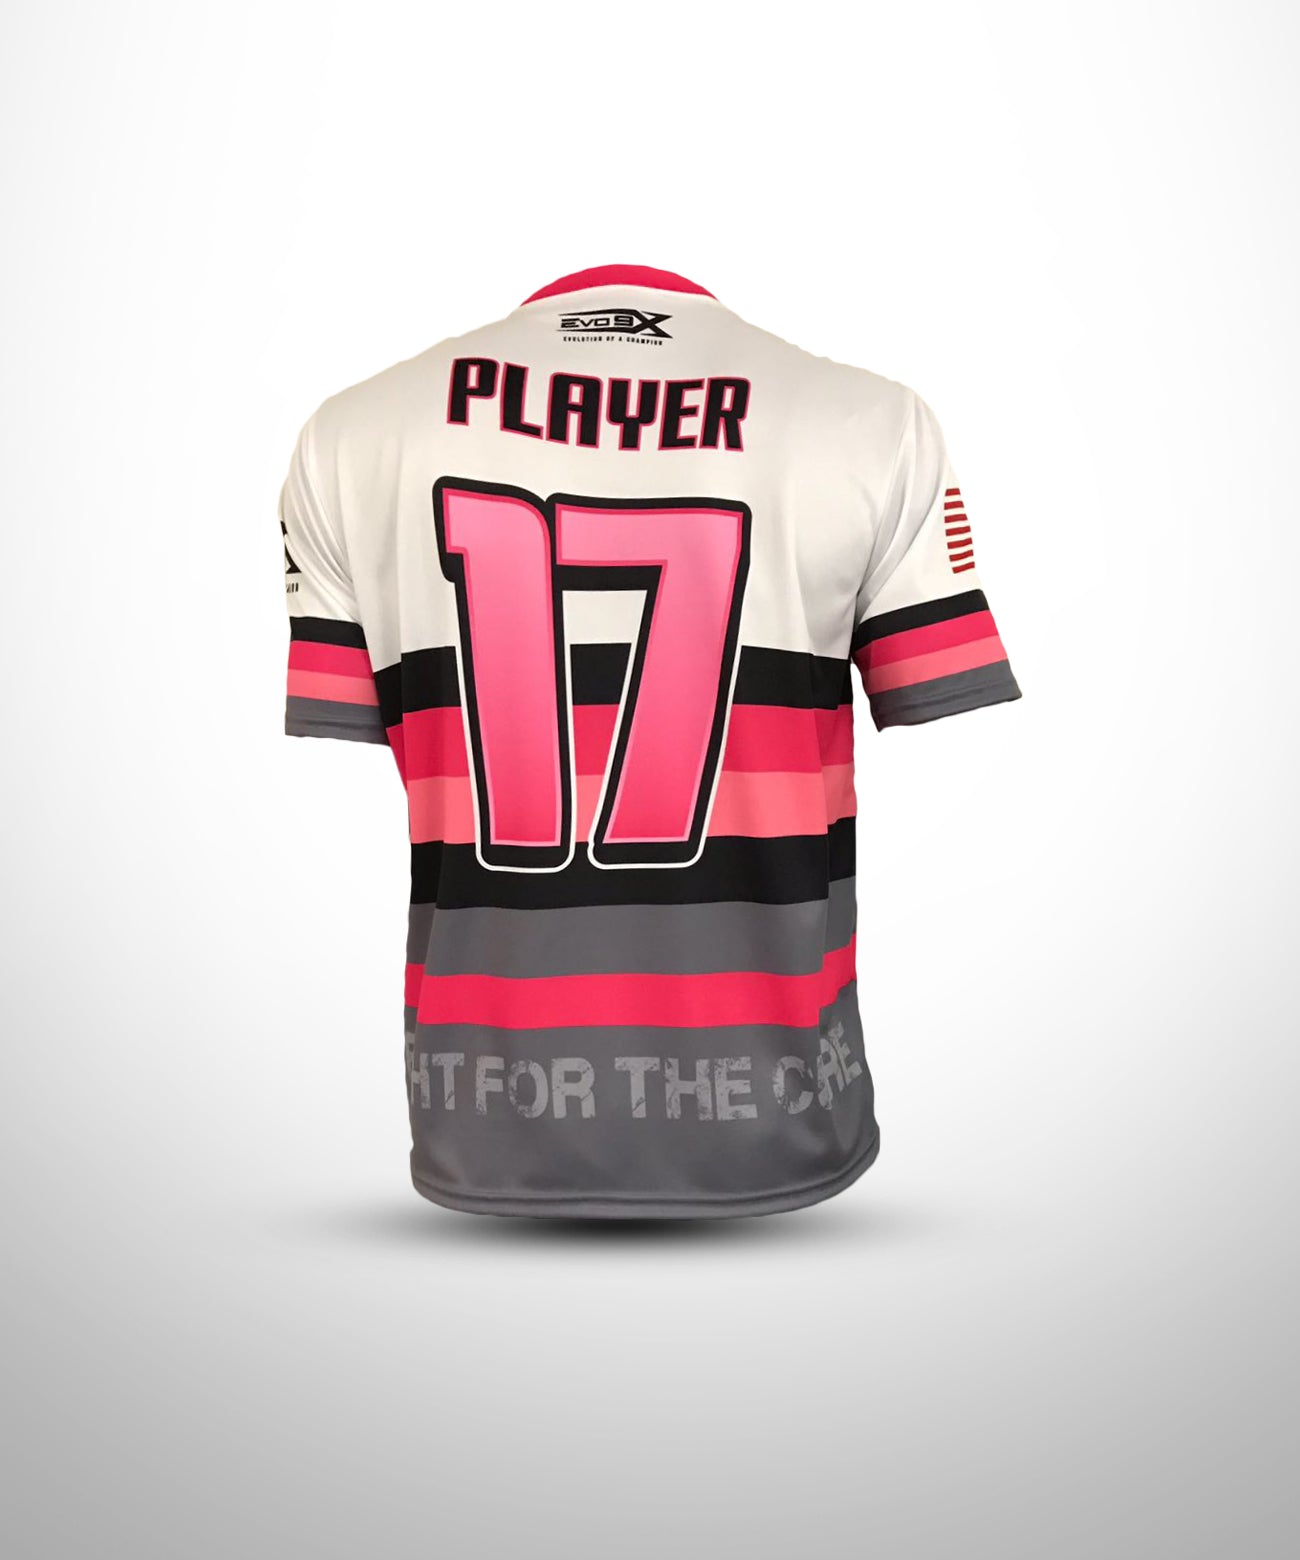 Custom Black Pink-White Authentic Football Jersey Men's Size:S